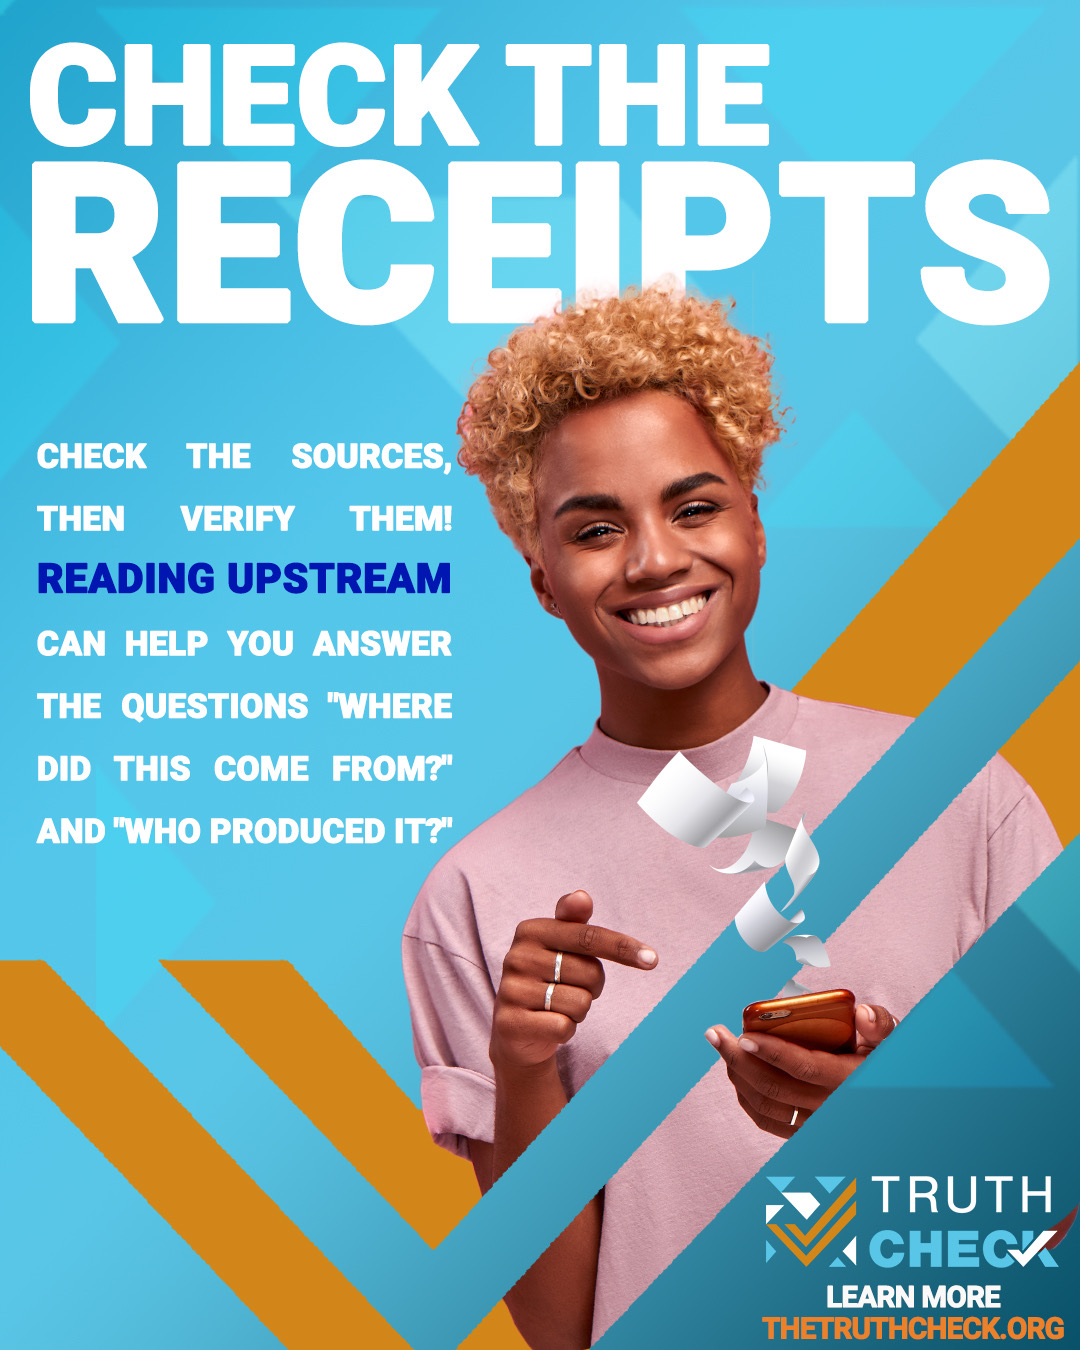 A black man wearing a pink shirt smiles and scrolls on his phone. The image shows "receipts" coming out of his phone.